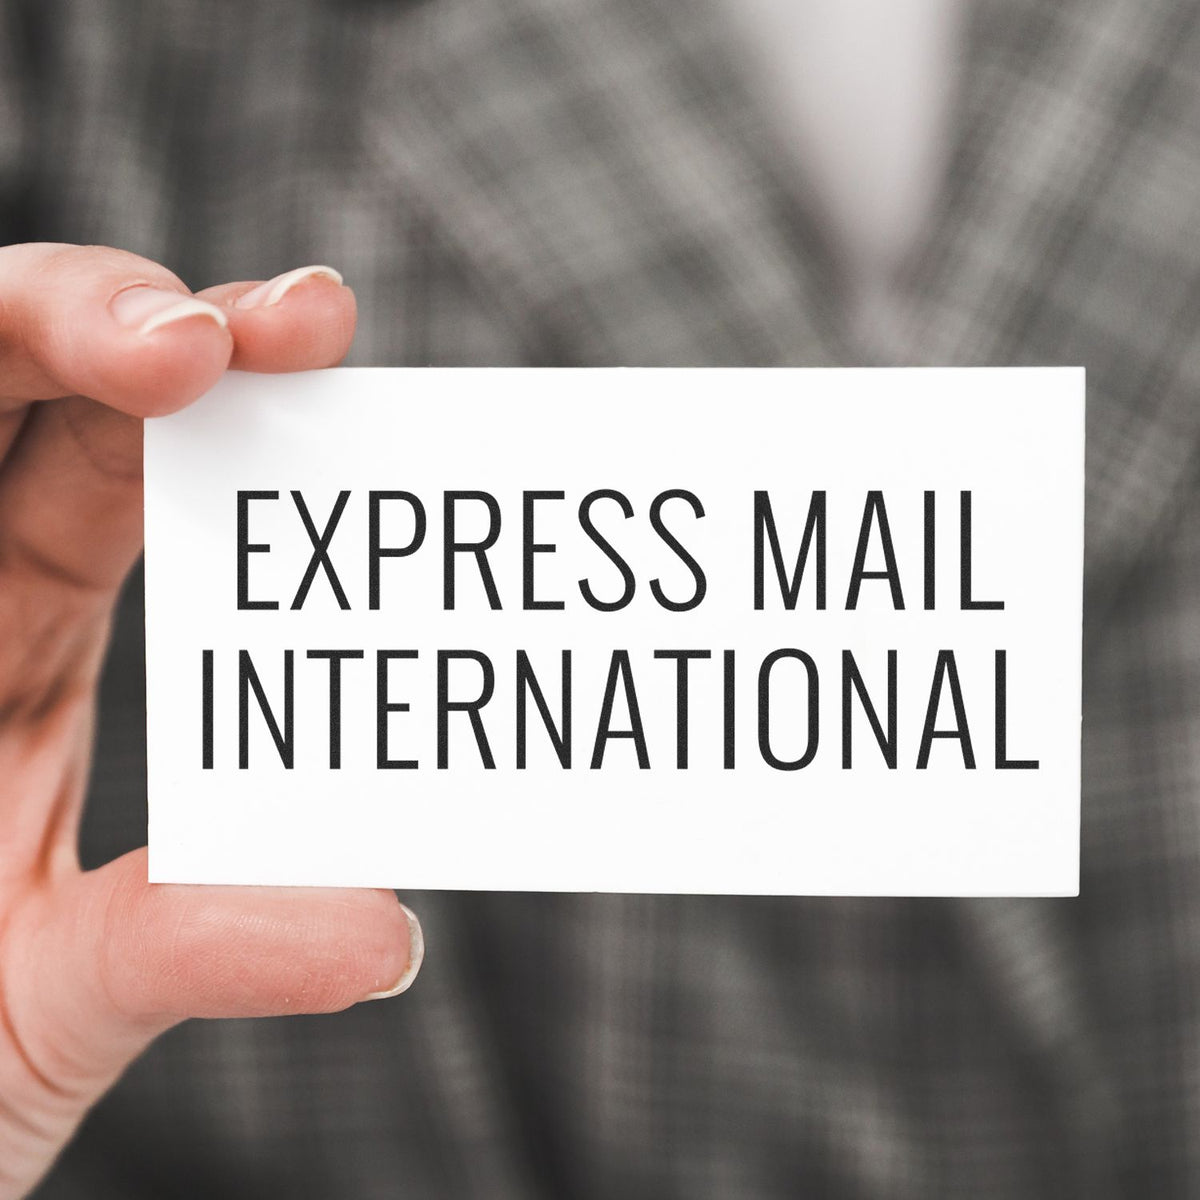 Express Mail International Rubber Stamp Lifestyle Photo